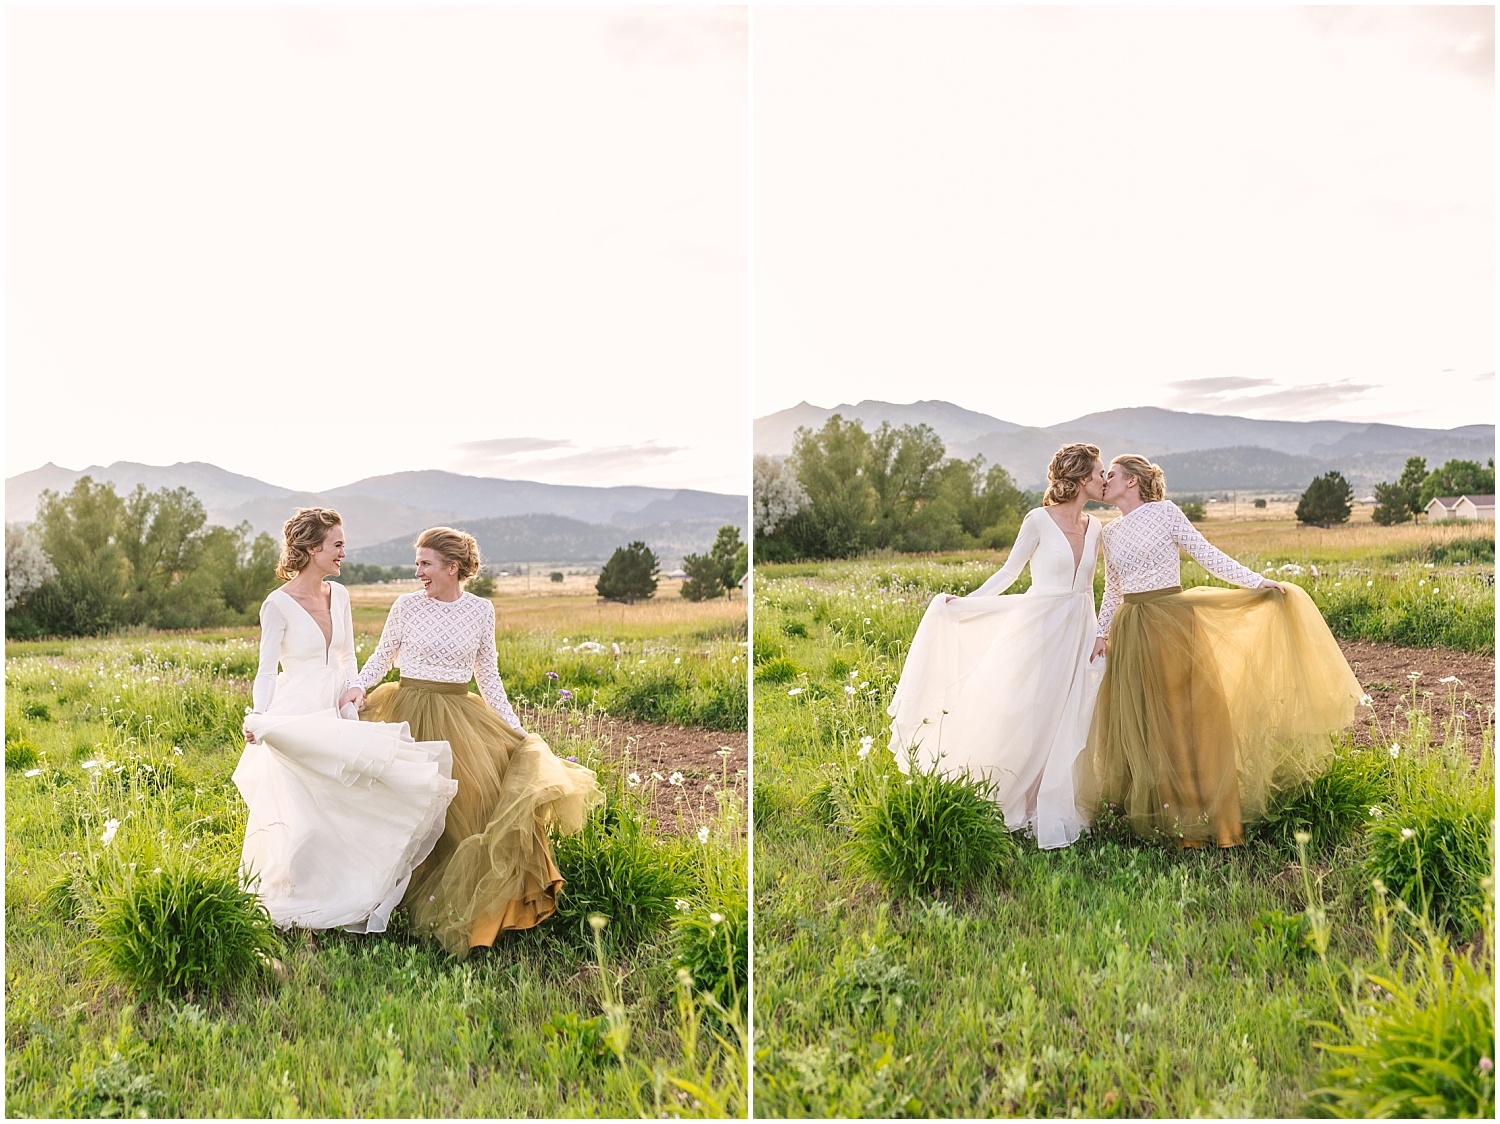 Brides dancing in the field at sunset at Pastures of Plenty wedding in Boulder Colorado